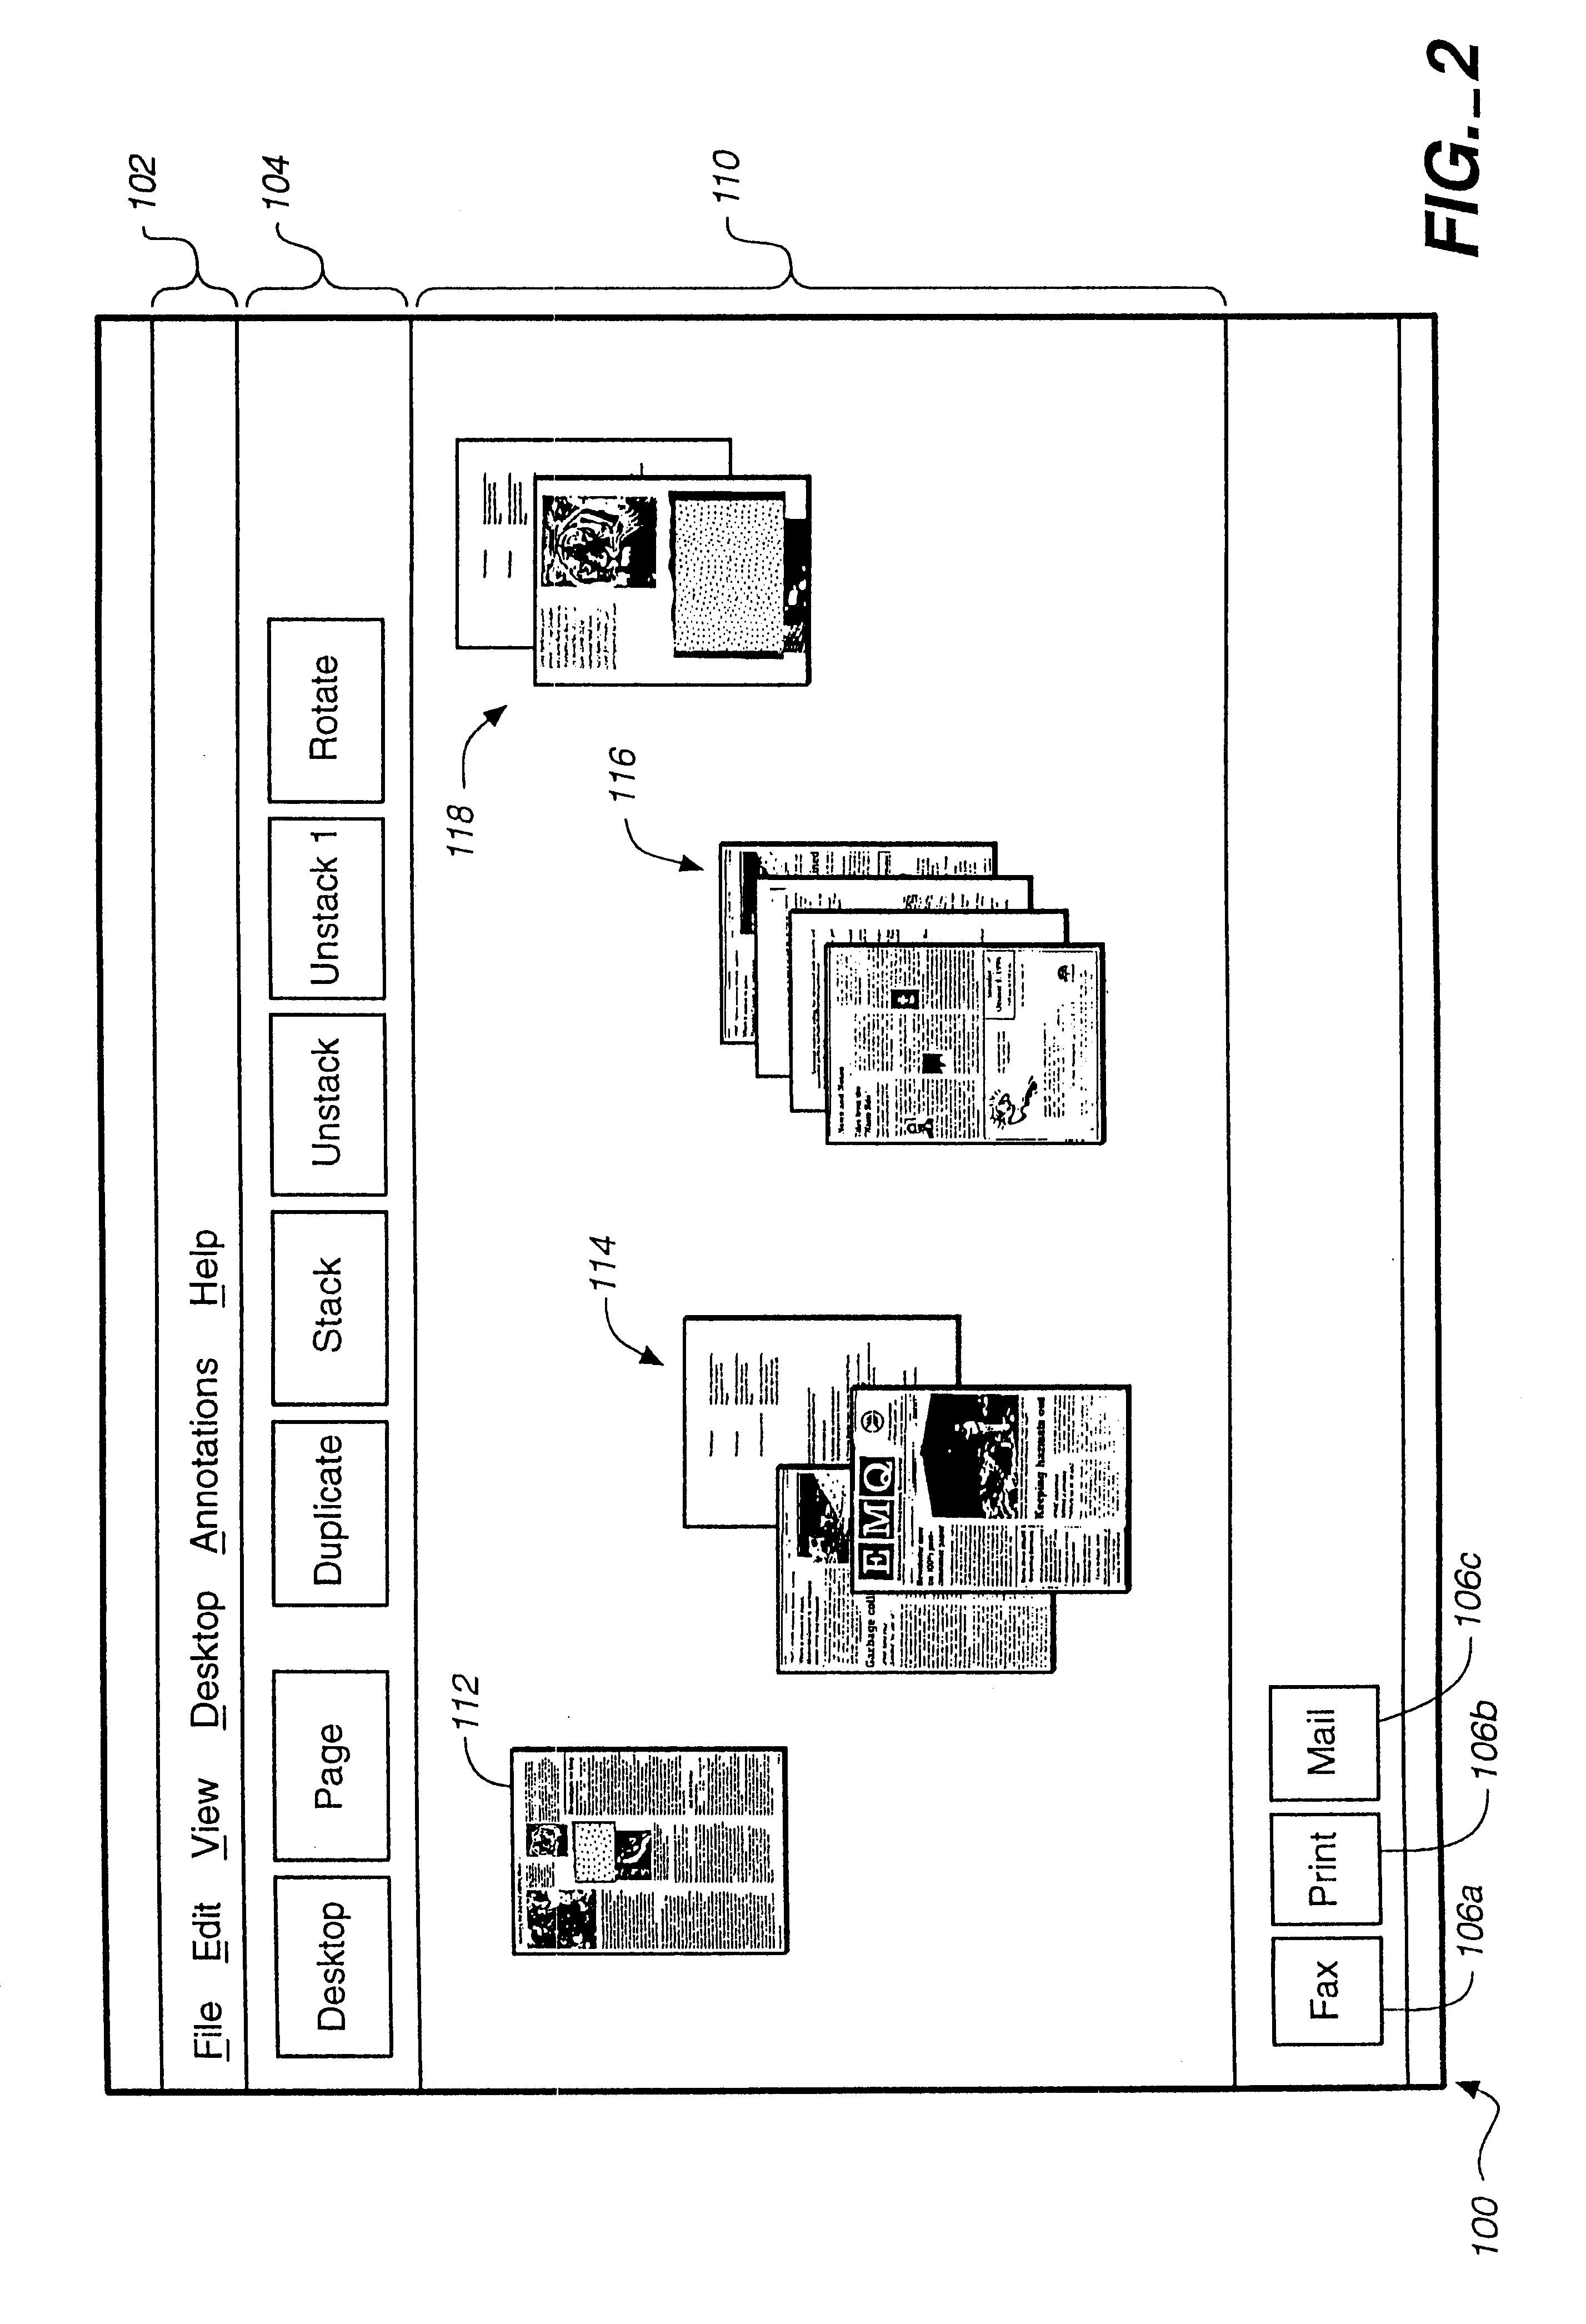 Method and apparatus for managing and navigating within stacks of document pages